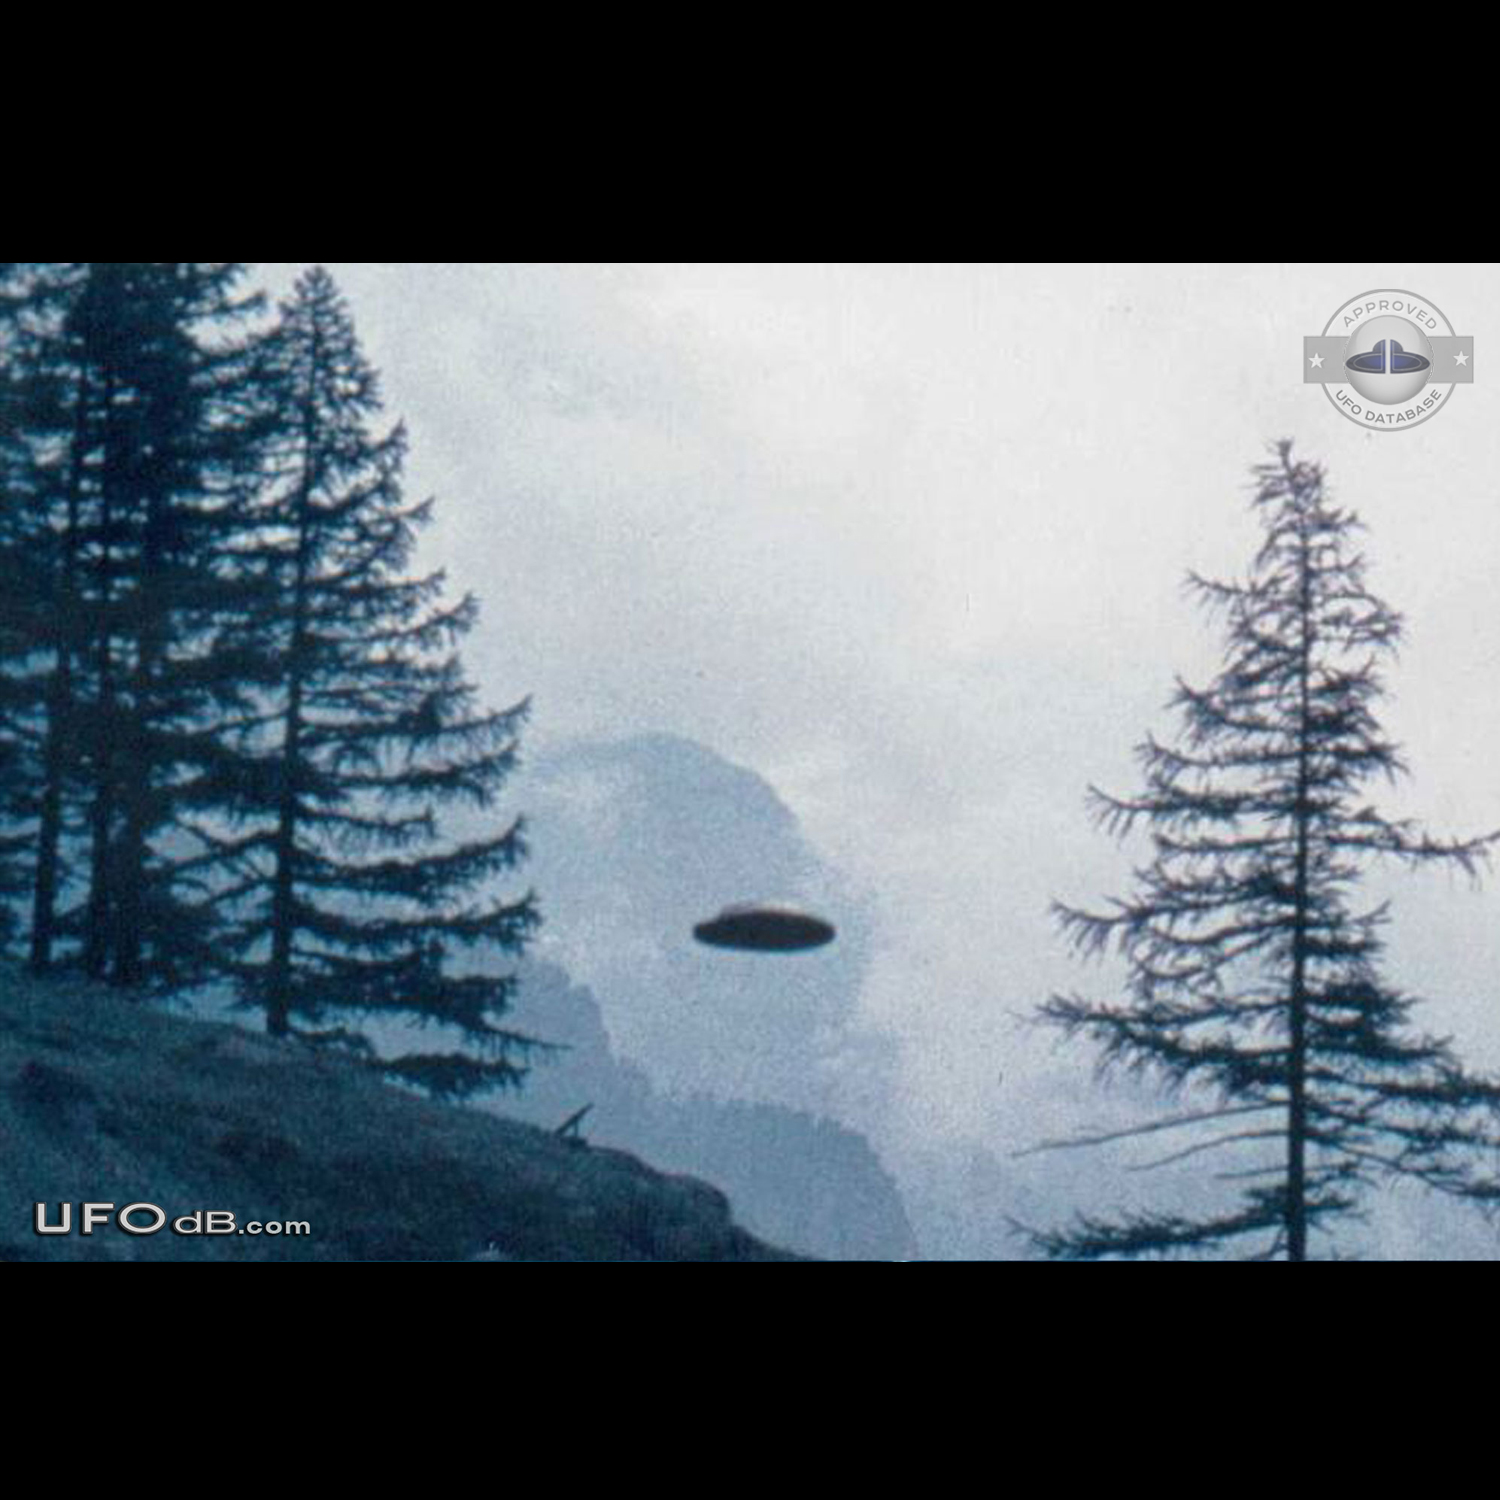 One of the Best UFO sighting backed by 2 UFO pictures Switzerland 1975 UFO Picture #459-3